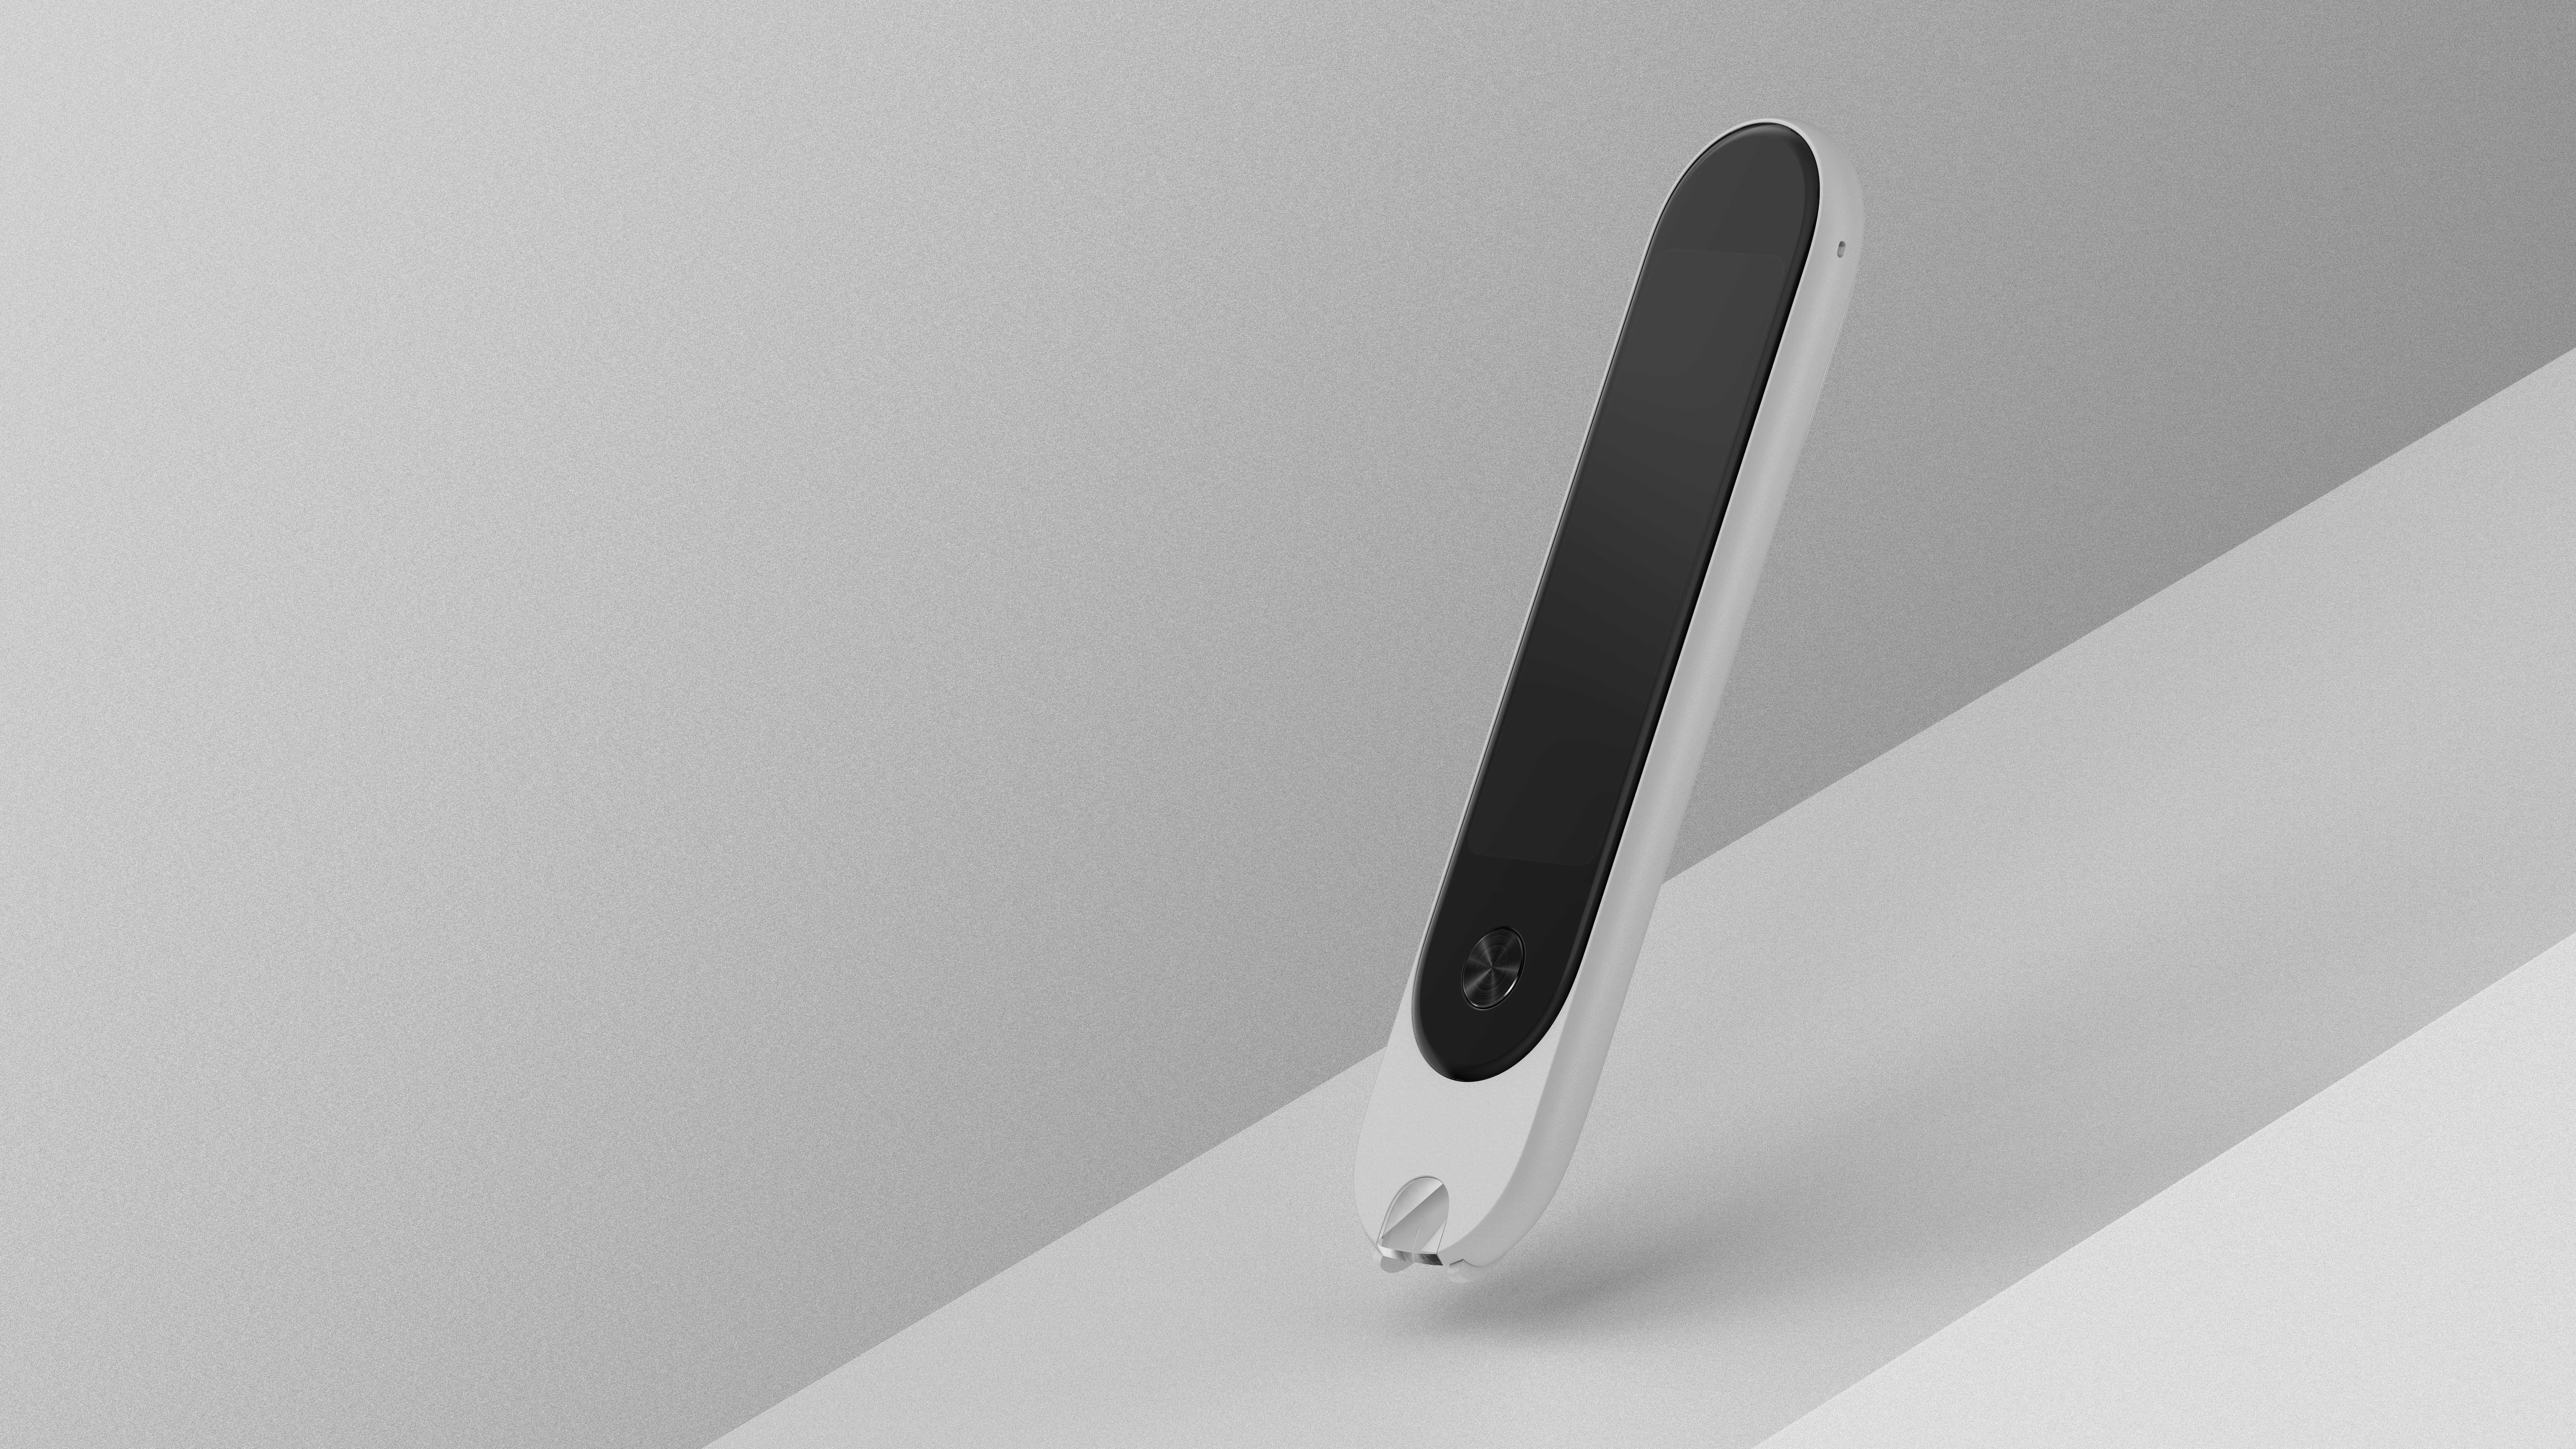 The MIJIA Dictionary Pen